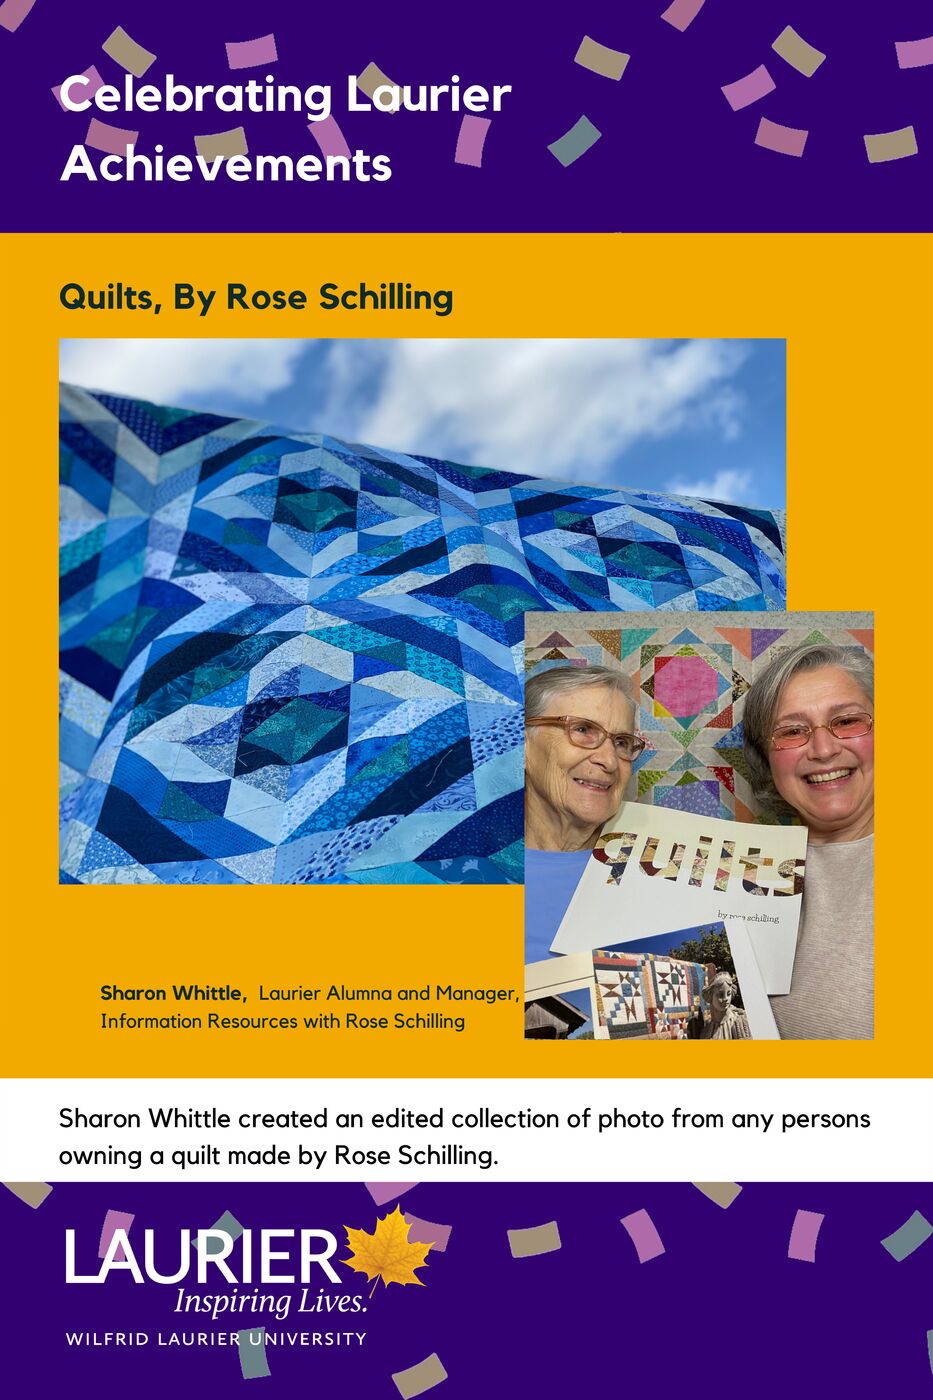 Quilts, By Rose Schilling promotional poster for the Celebrating Laurier Achievements program with headshots of the catalogue's co-creators, Sharon Whittle and Rose Schilling.